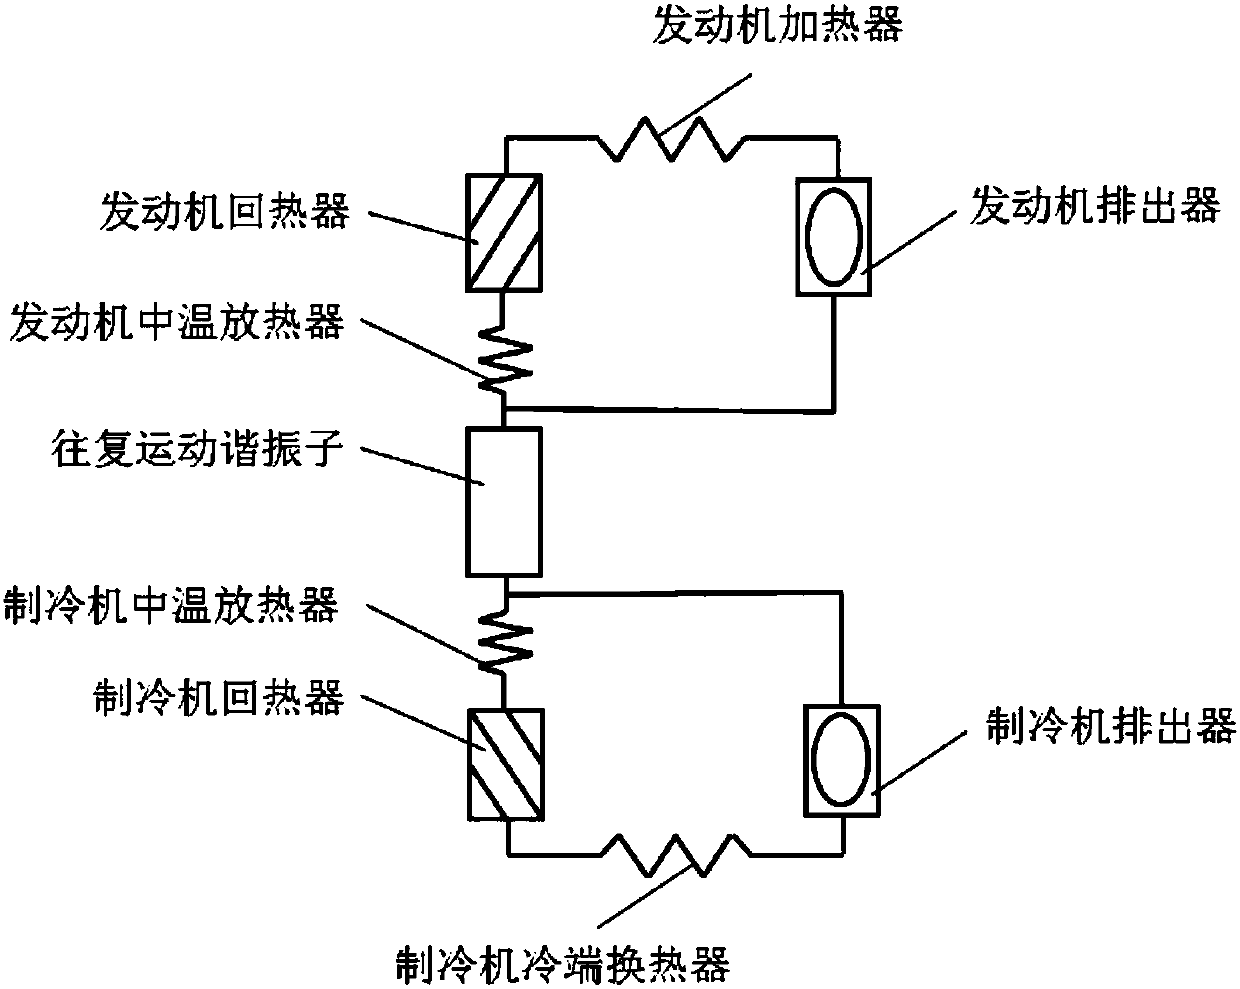 Heat driven combined cooling, heating and power system utilizing high-temperature heat source